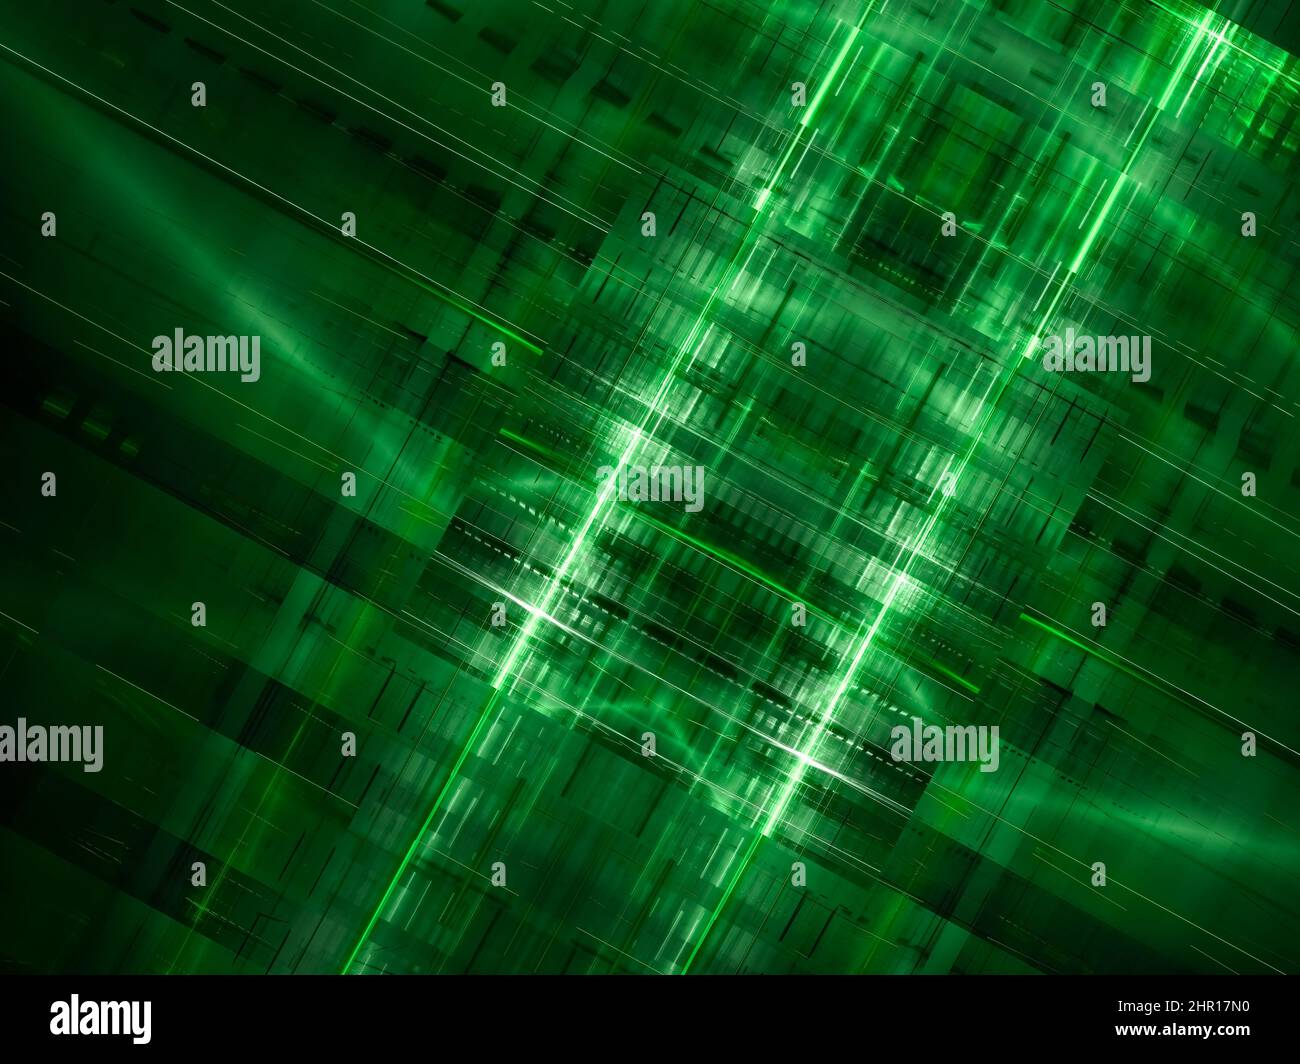 Technology background - grid and light effect - abstract fractal Stock Photo